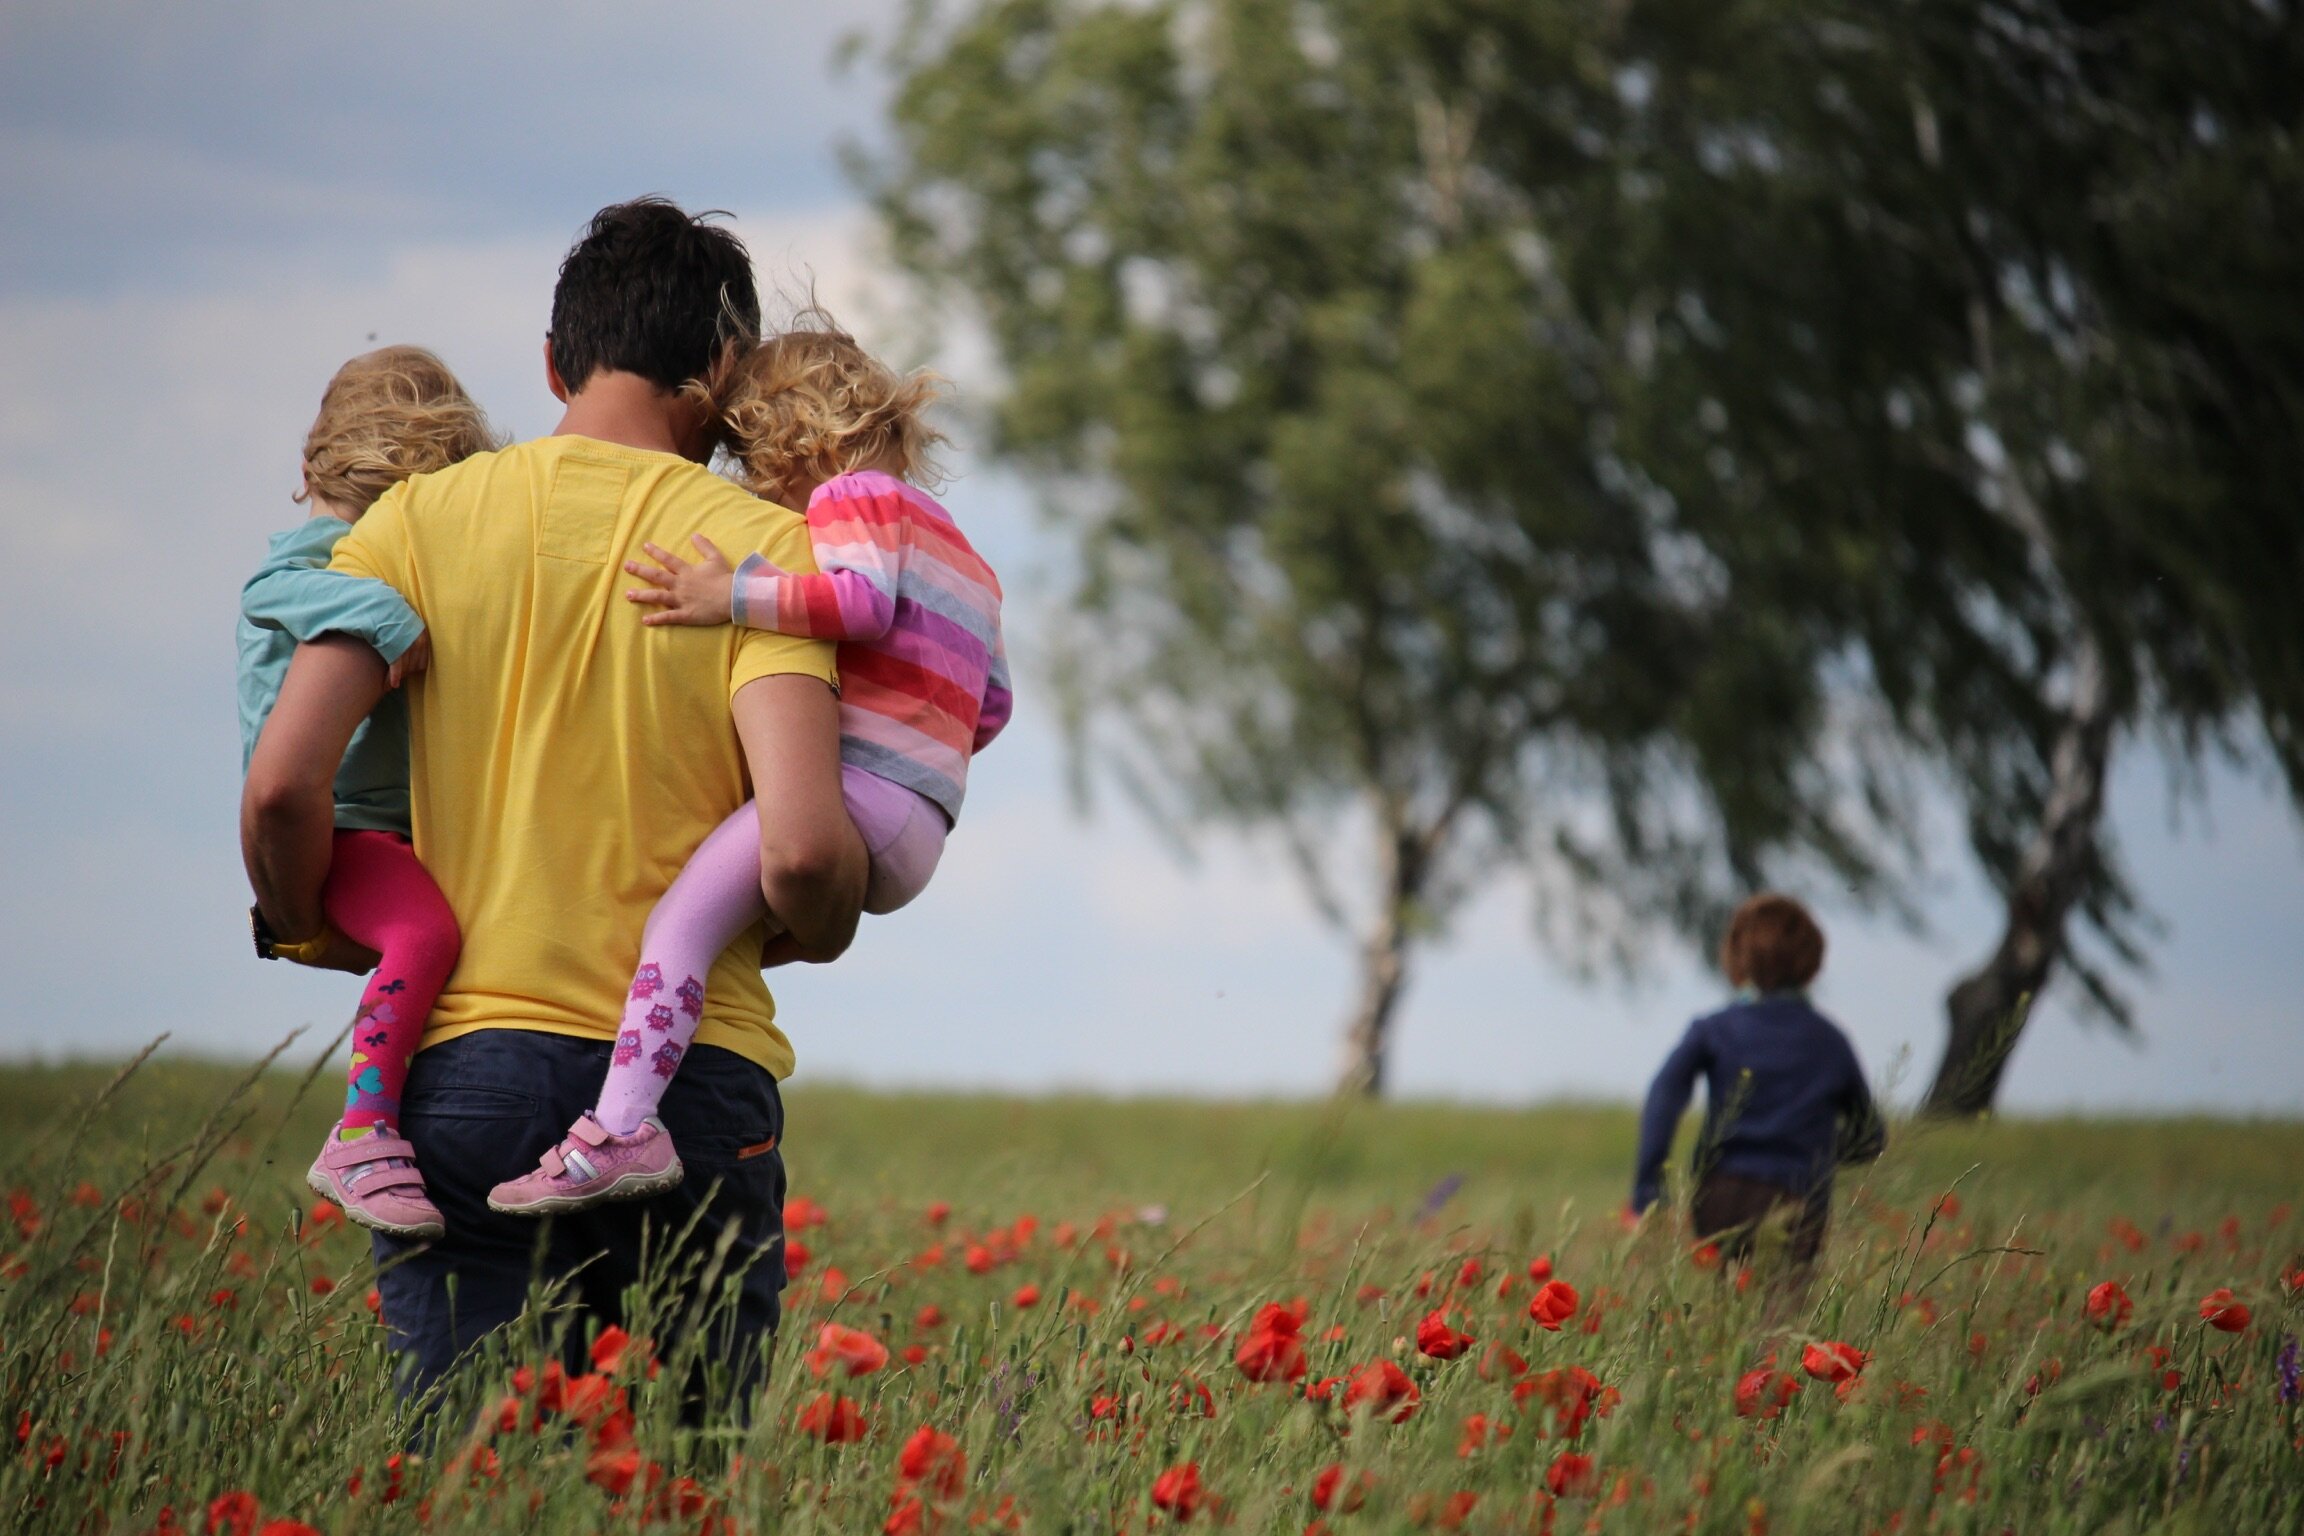 A man is carrying his kids through a field of grass